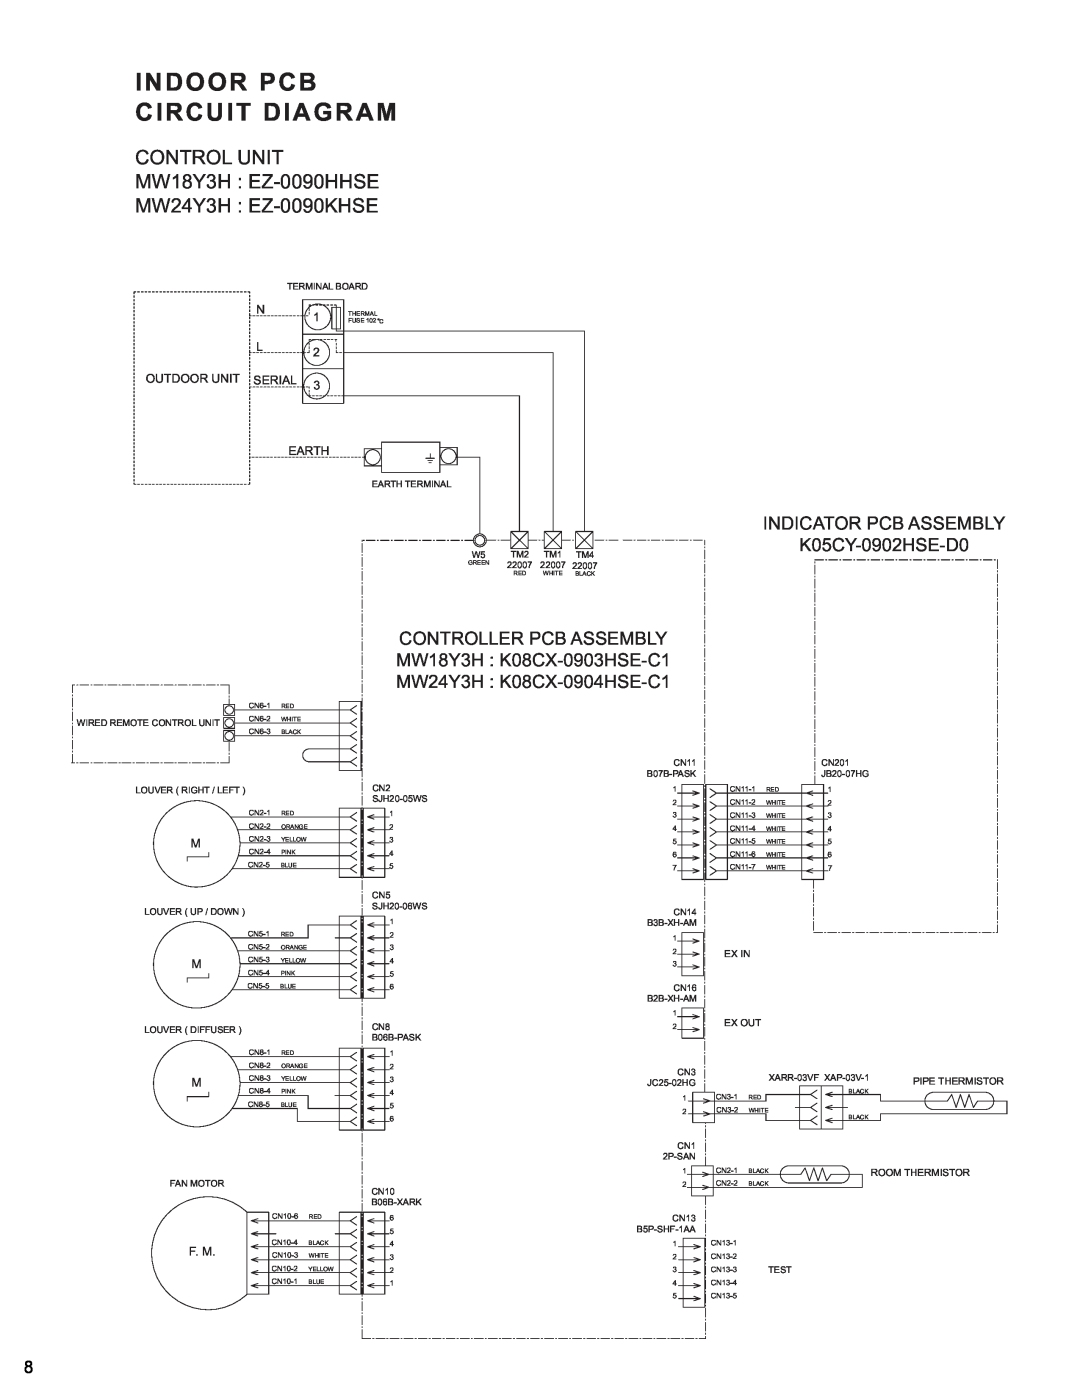 Friedrich MR24Y3H, MW18Y3H Indoor Pcb Circuit Diagram, INDICATOR PCB ASSEMBLY K05CY-0902HSE-D0, Controller Pcb Assembly 